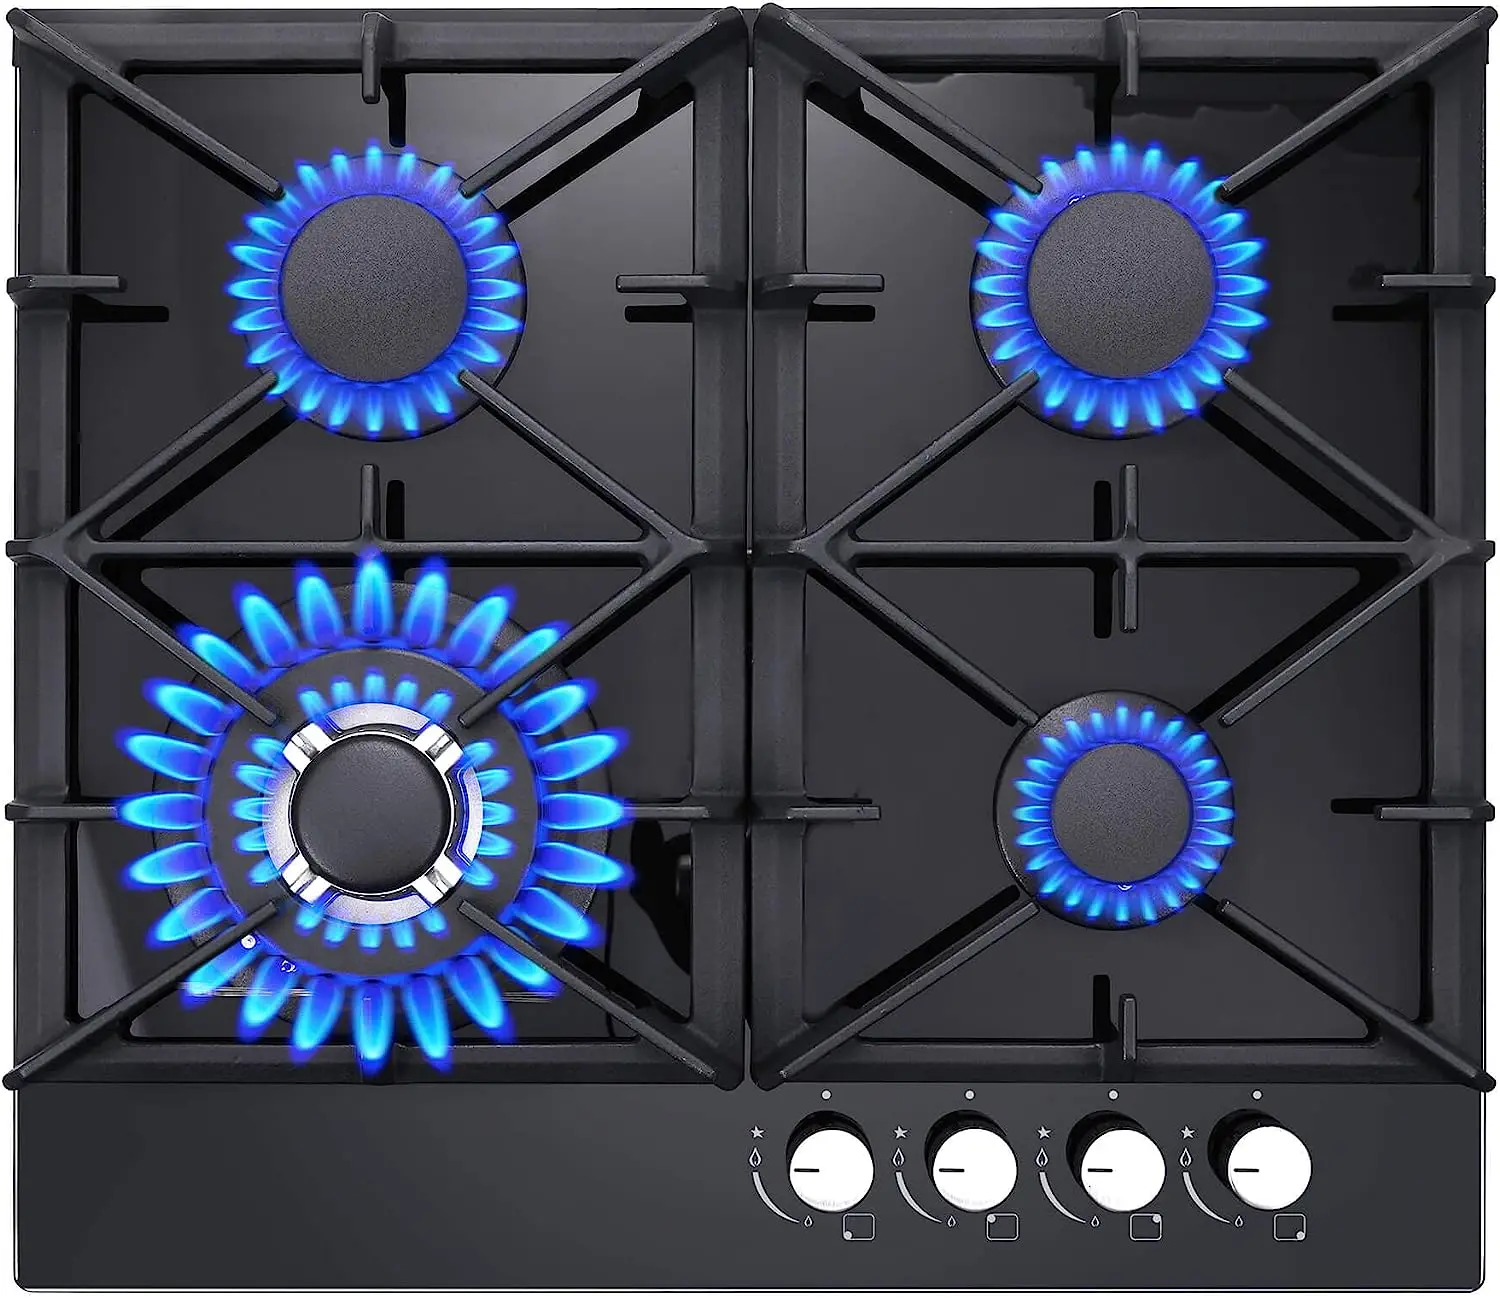 

Gas Stove Top 24 inch Eascookchef,24 inch Gas Cooktop 4 Burner,Black Tempered Glass Dual Burners Gas Countertop